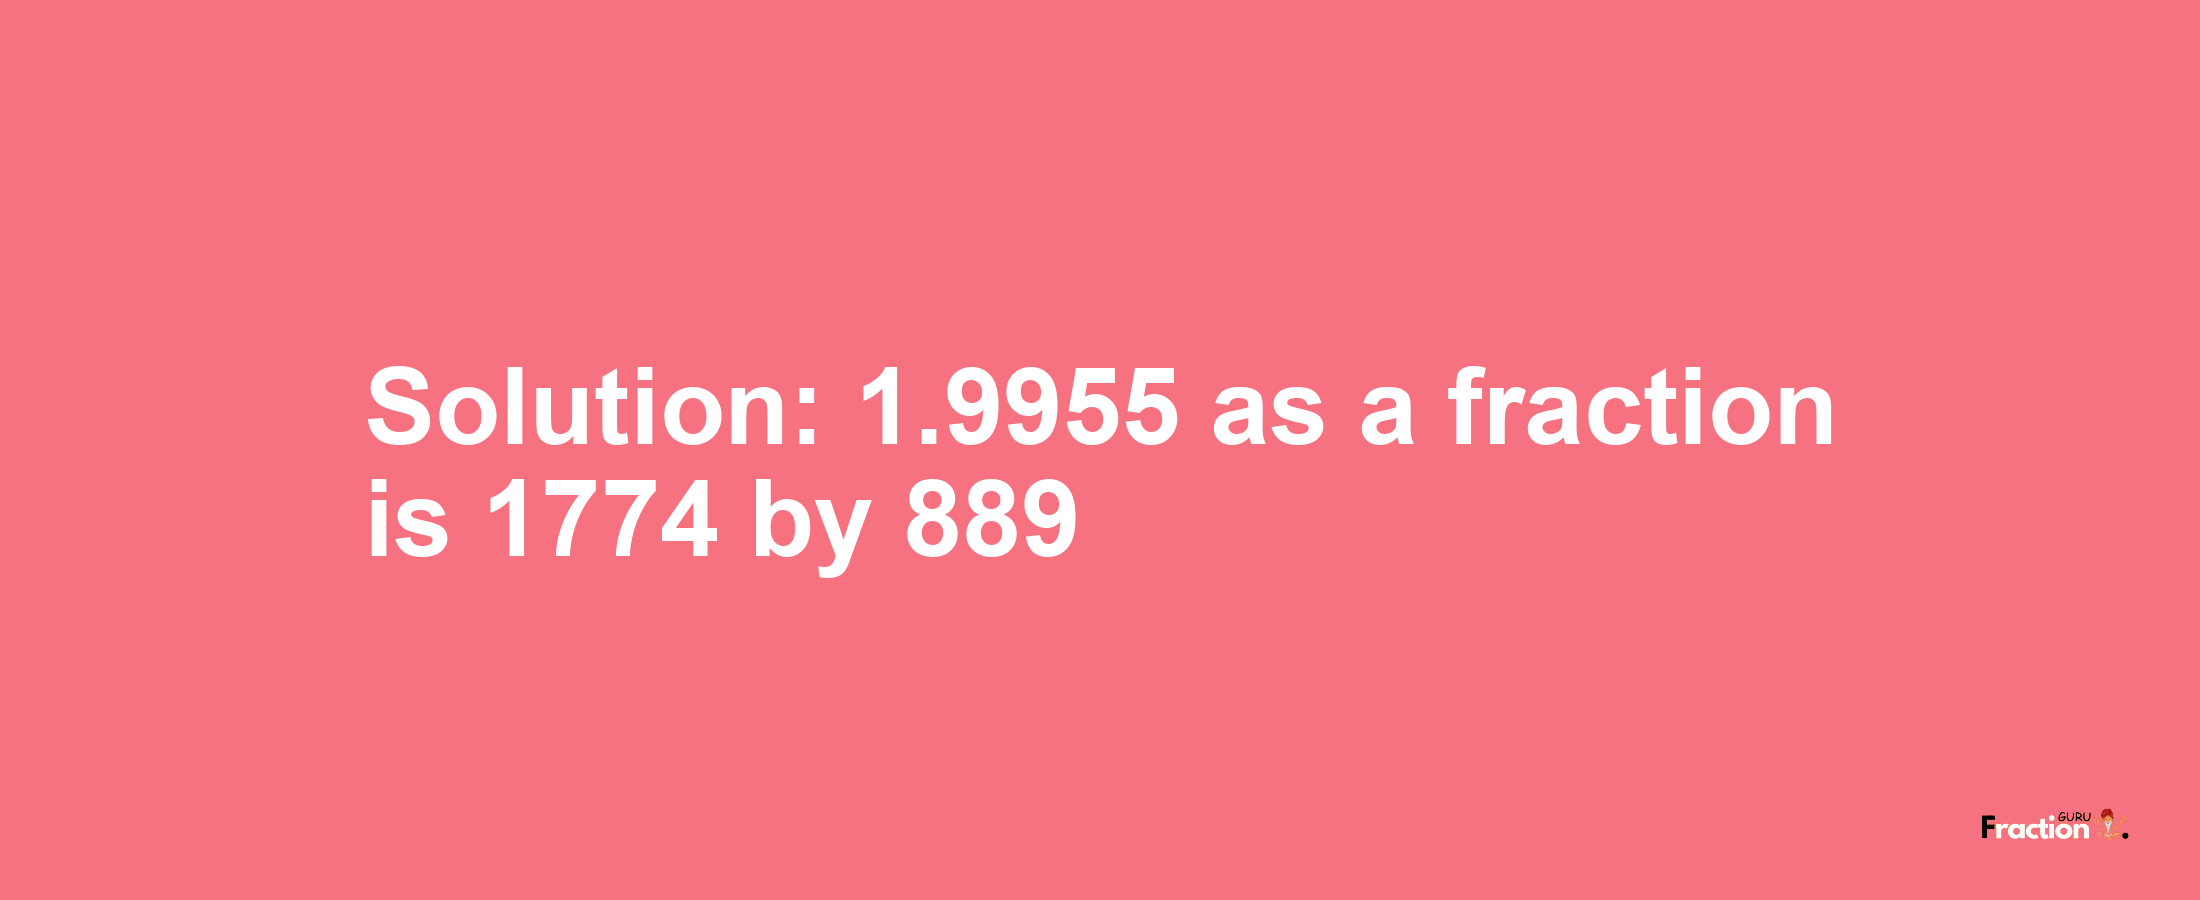 Solution:1.9955 as a fraction is 1774/889